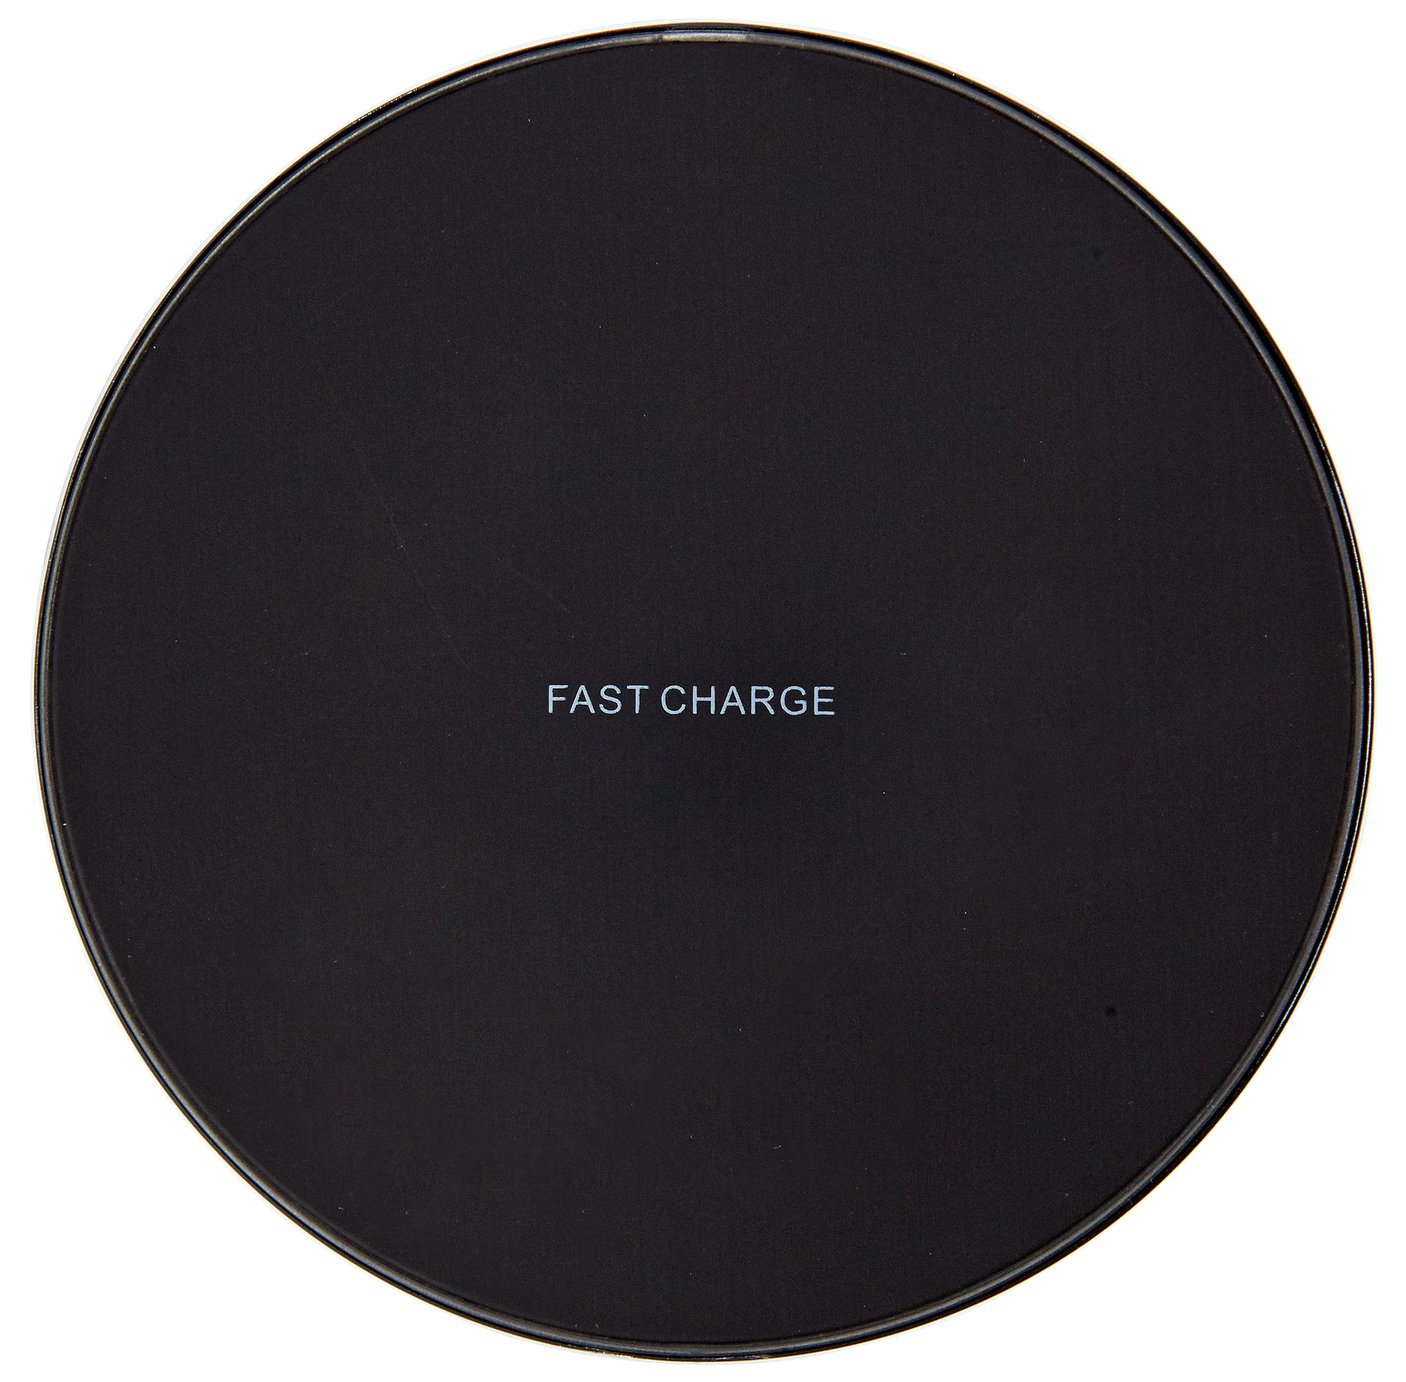 10W Wireless Charger - Black